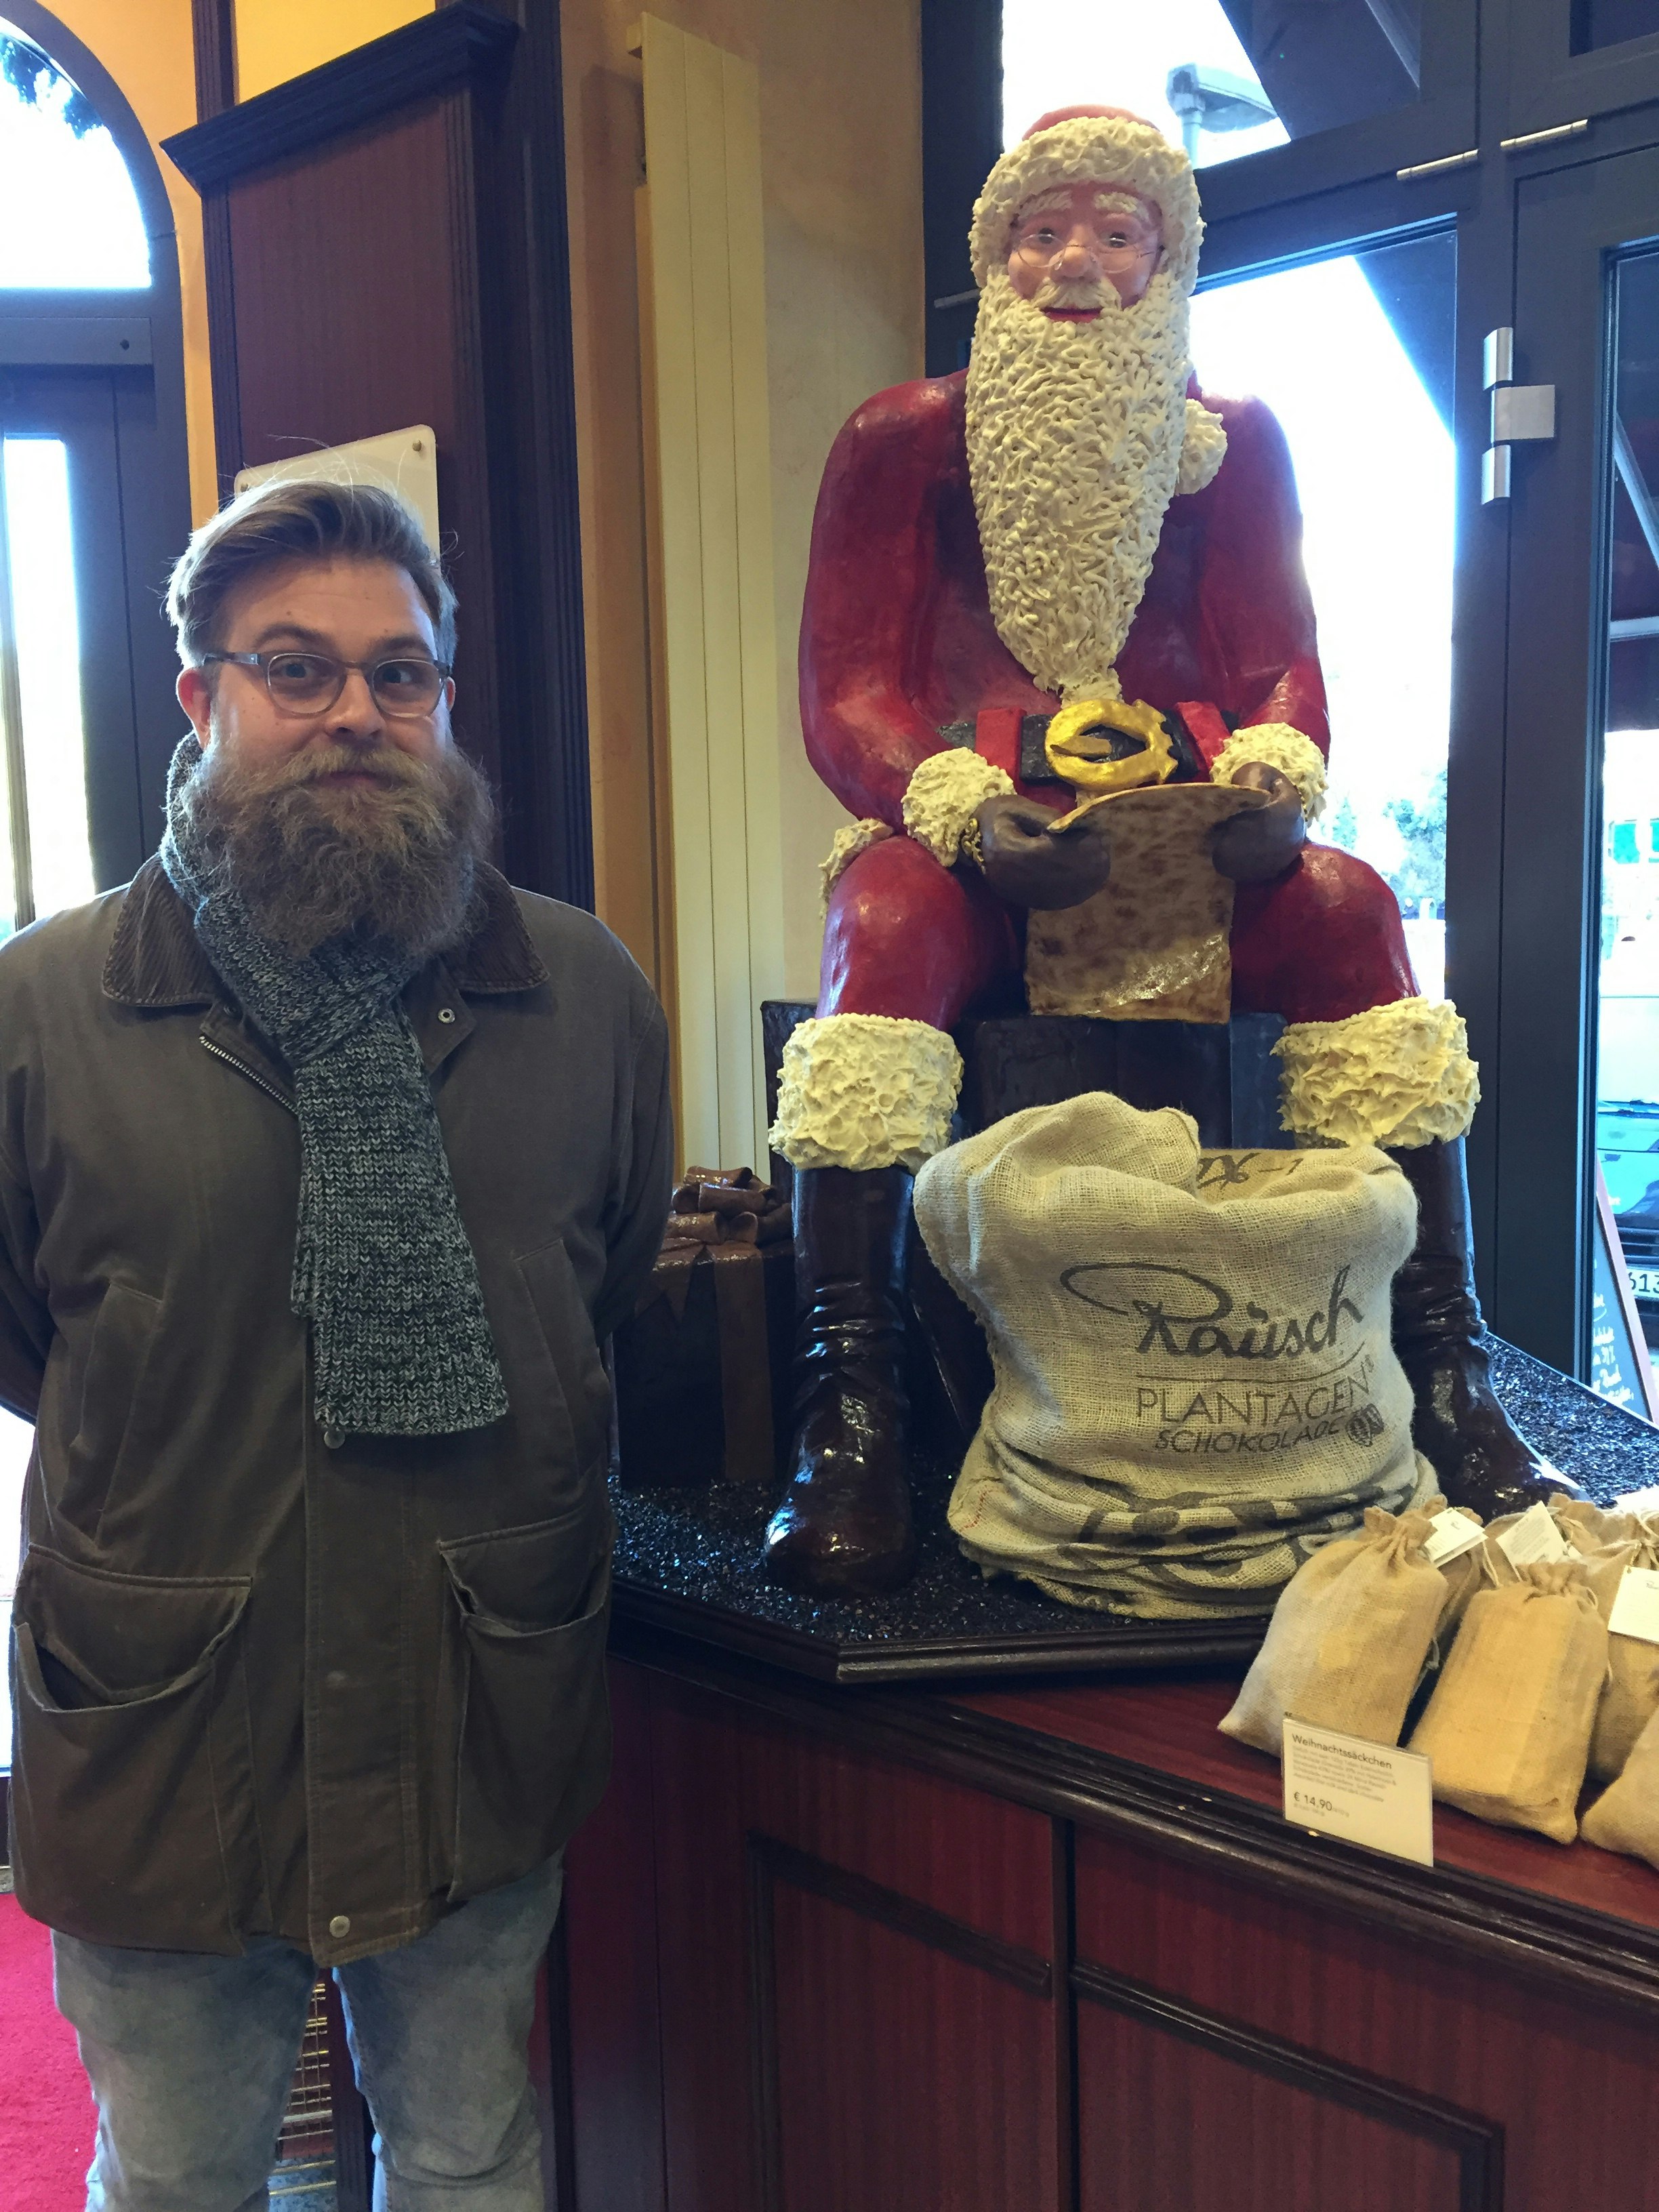 Writer Ryan Barrell is standing next to a sculpture of Santa Claus, made entirely out of chocolate, at Rausch Schokoladenhaus.